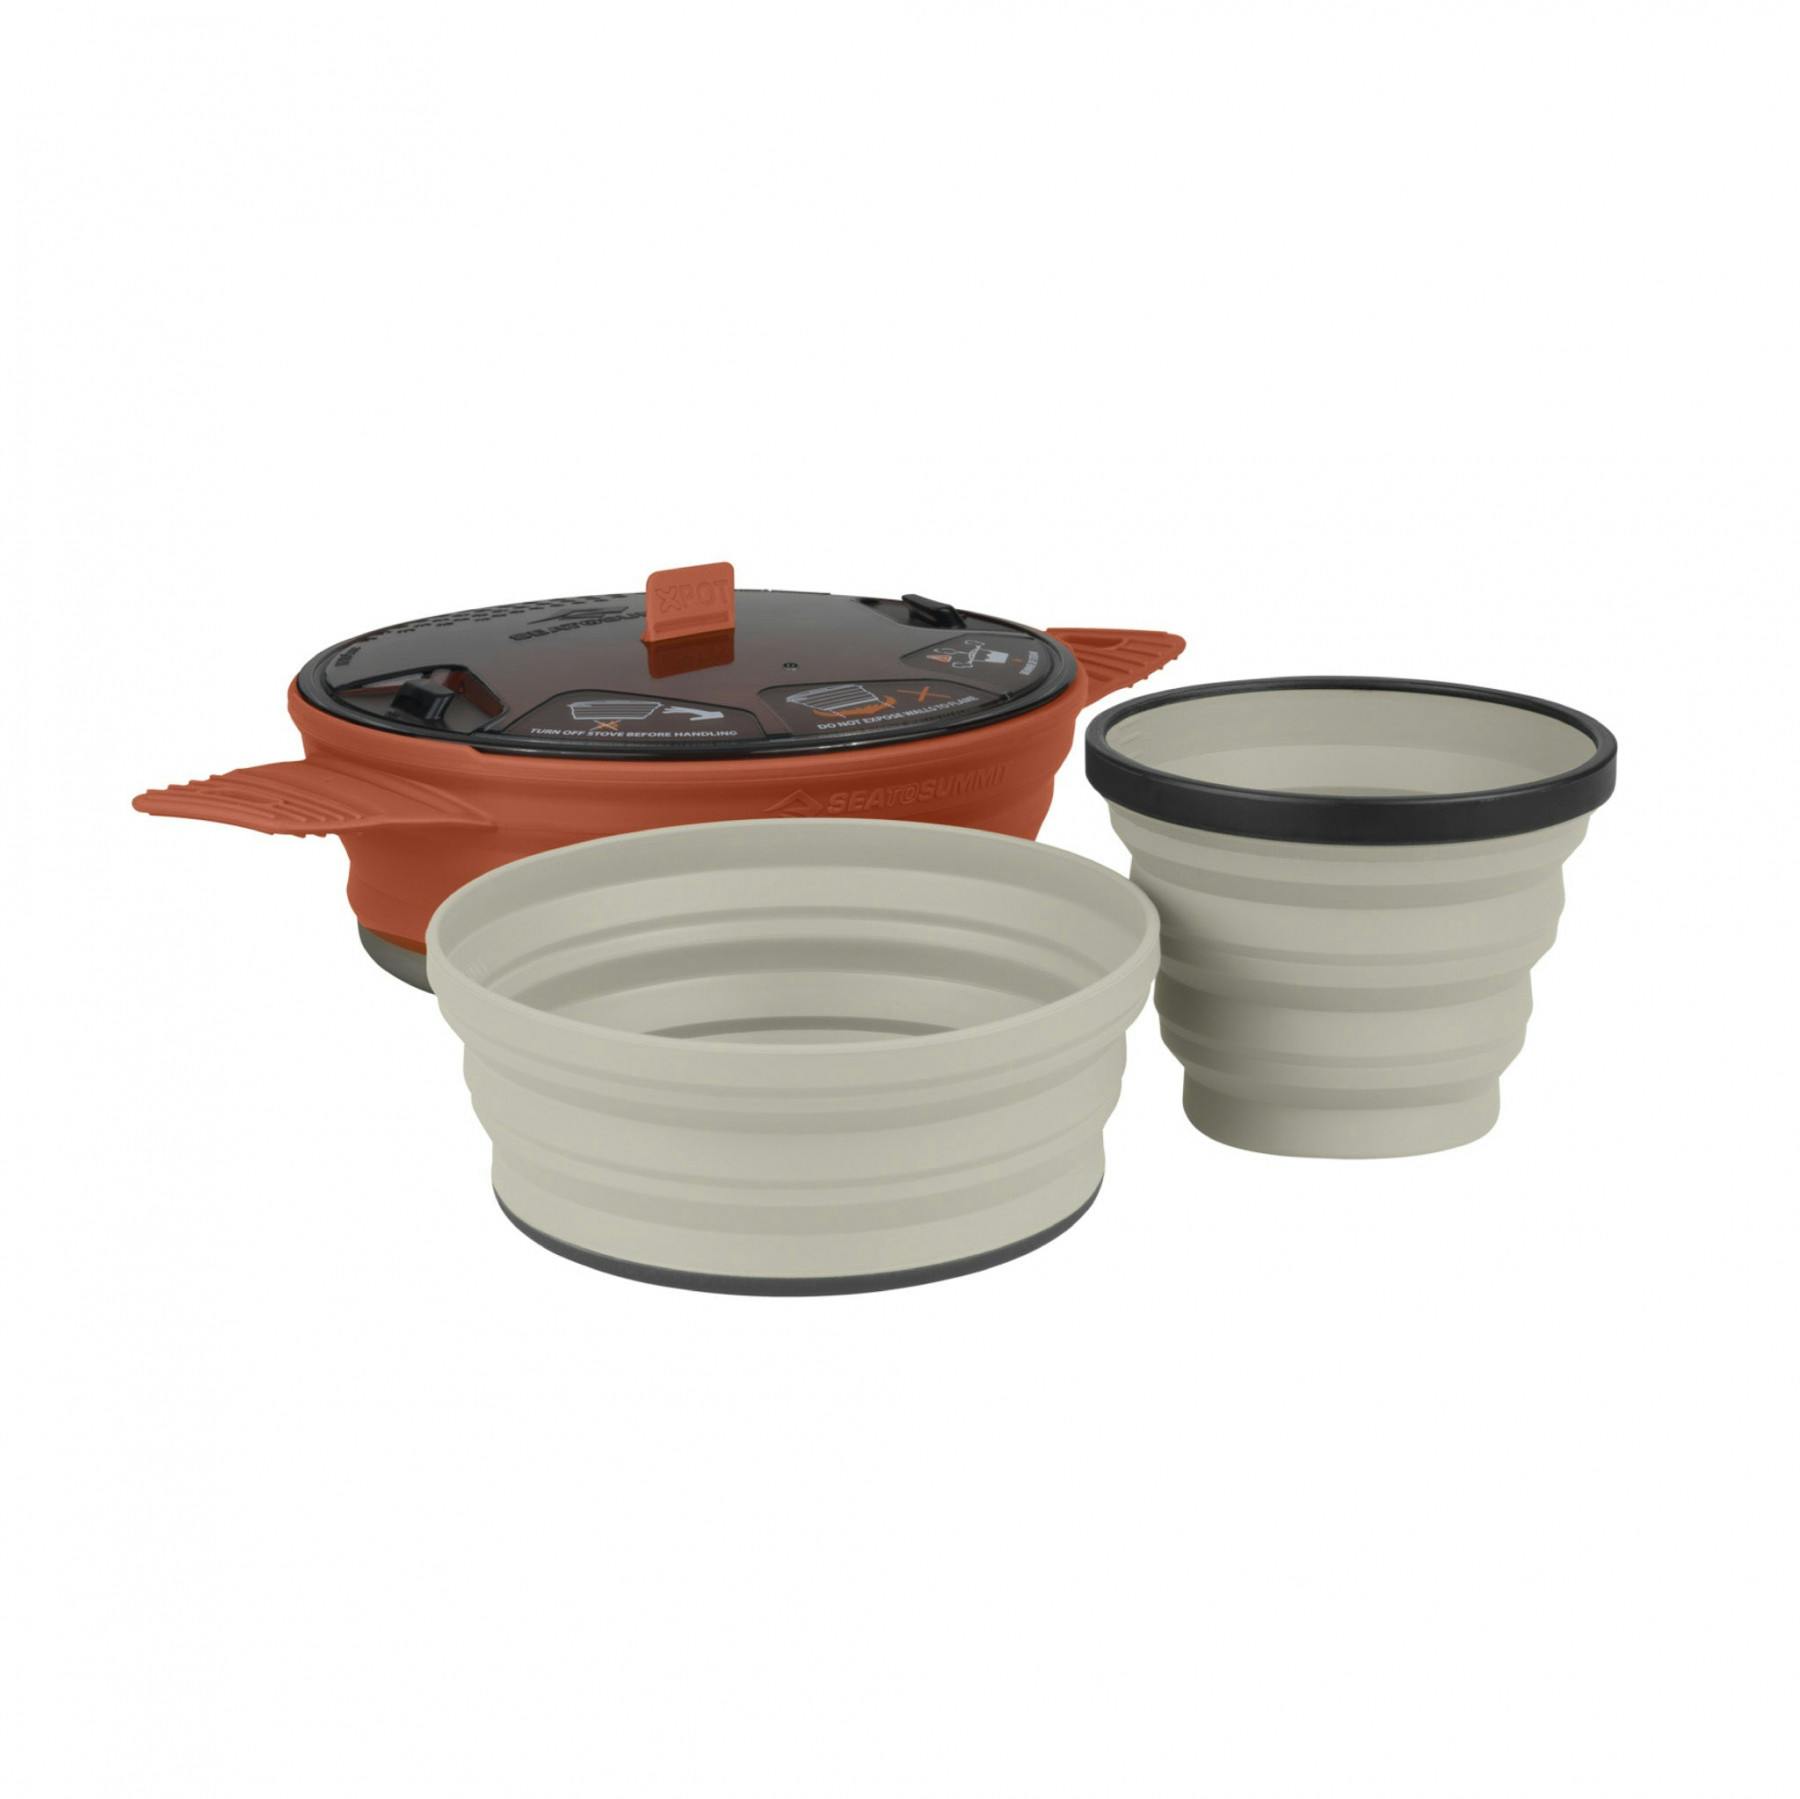 Sea to Summit X Set 21 - 3 Piece Collapsible Cook Set